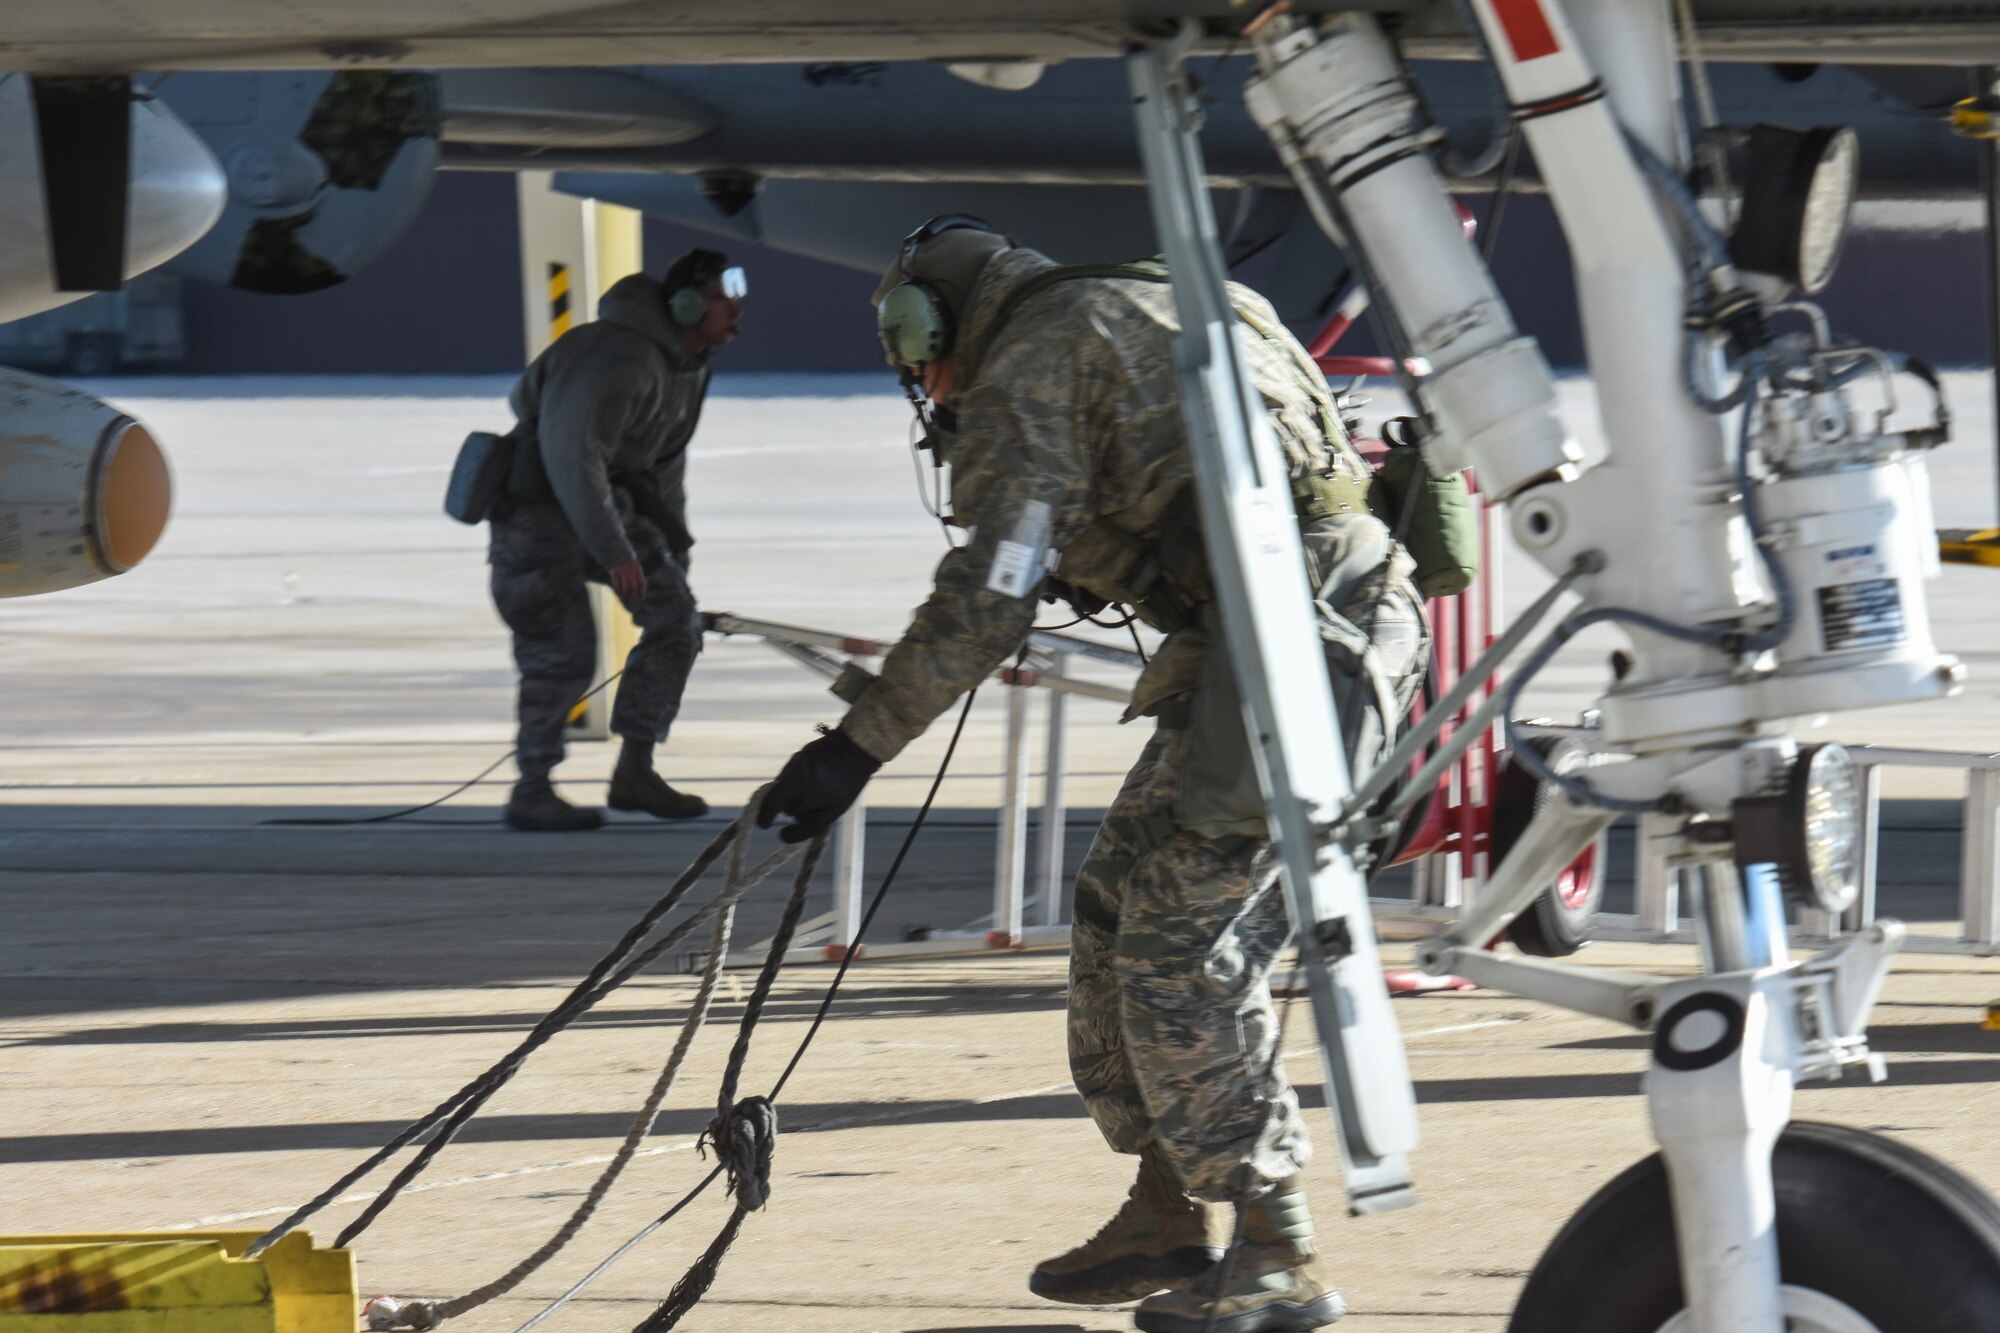 Airman 1st Class Thomas Satterlee, left, and Tech. Sgt. Joshua Hickerson, both crew chiefs with the 442d Maintenance Squadron, prepare the aircraft for takeoff Nov. 3, 2019, at Whiteman Air Force Base, Mo. The pair, along with the 442d Fighter Wing as a whole, are scheduled to participate in a 3-day readiness exercise to validate the wing’s ability to perform mission essential tasks during contingency operations.